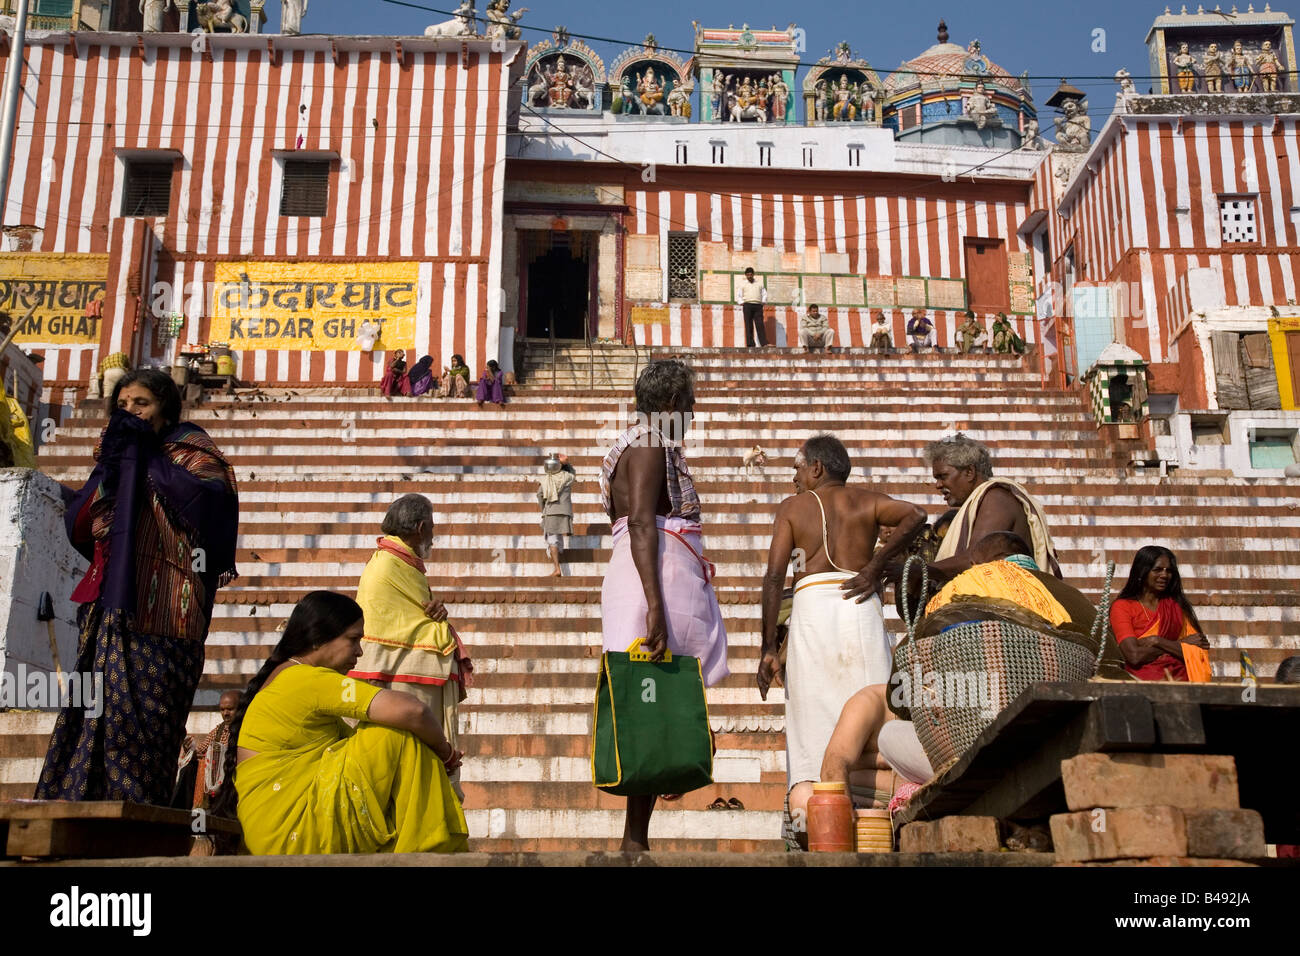 People gather on the ghats in the city of Varanasi, India. Stock Photo